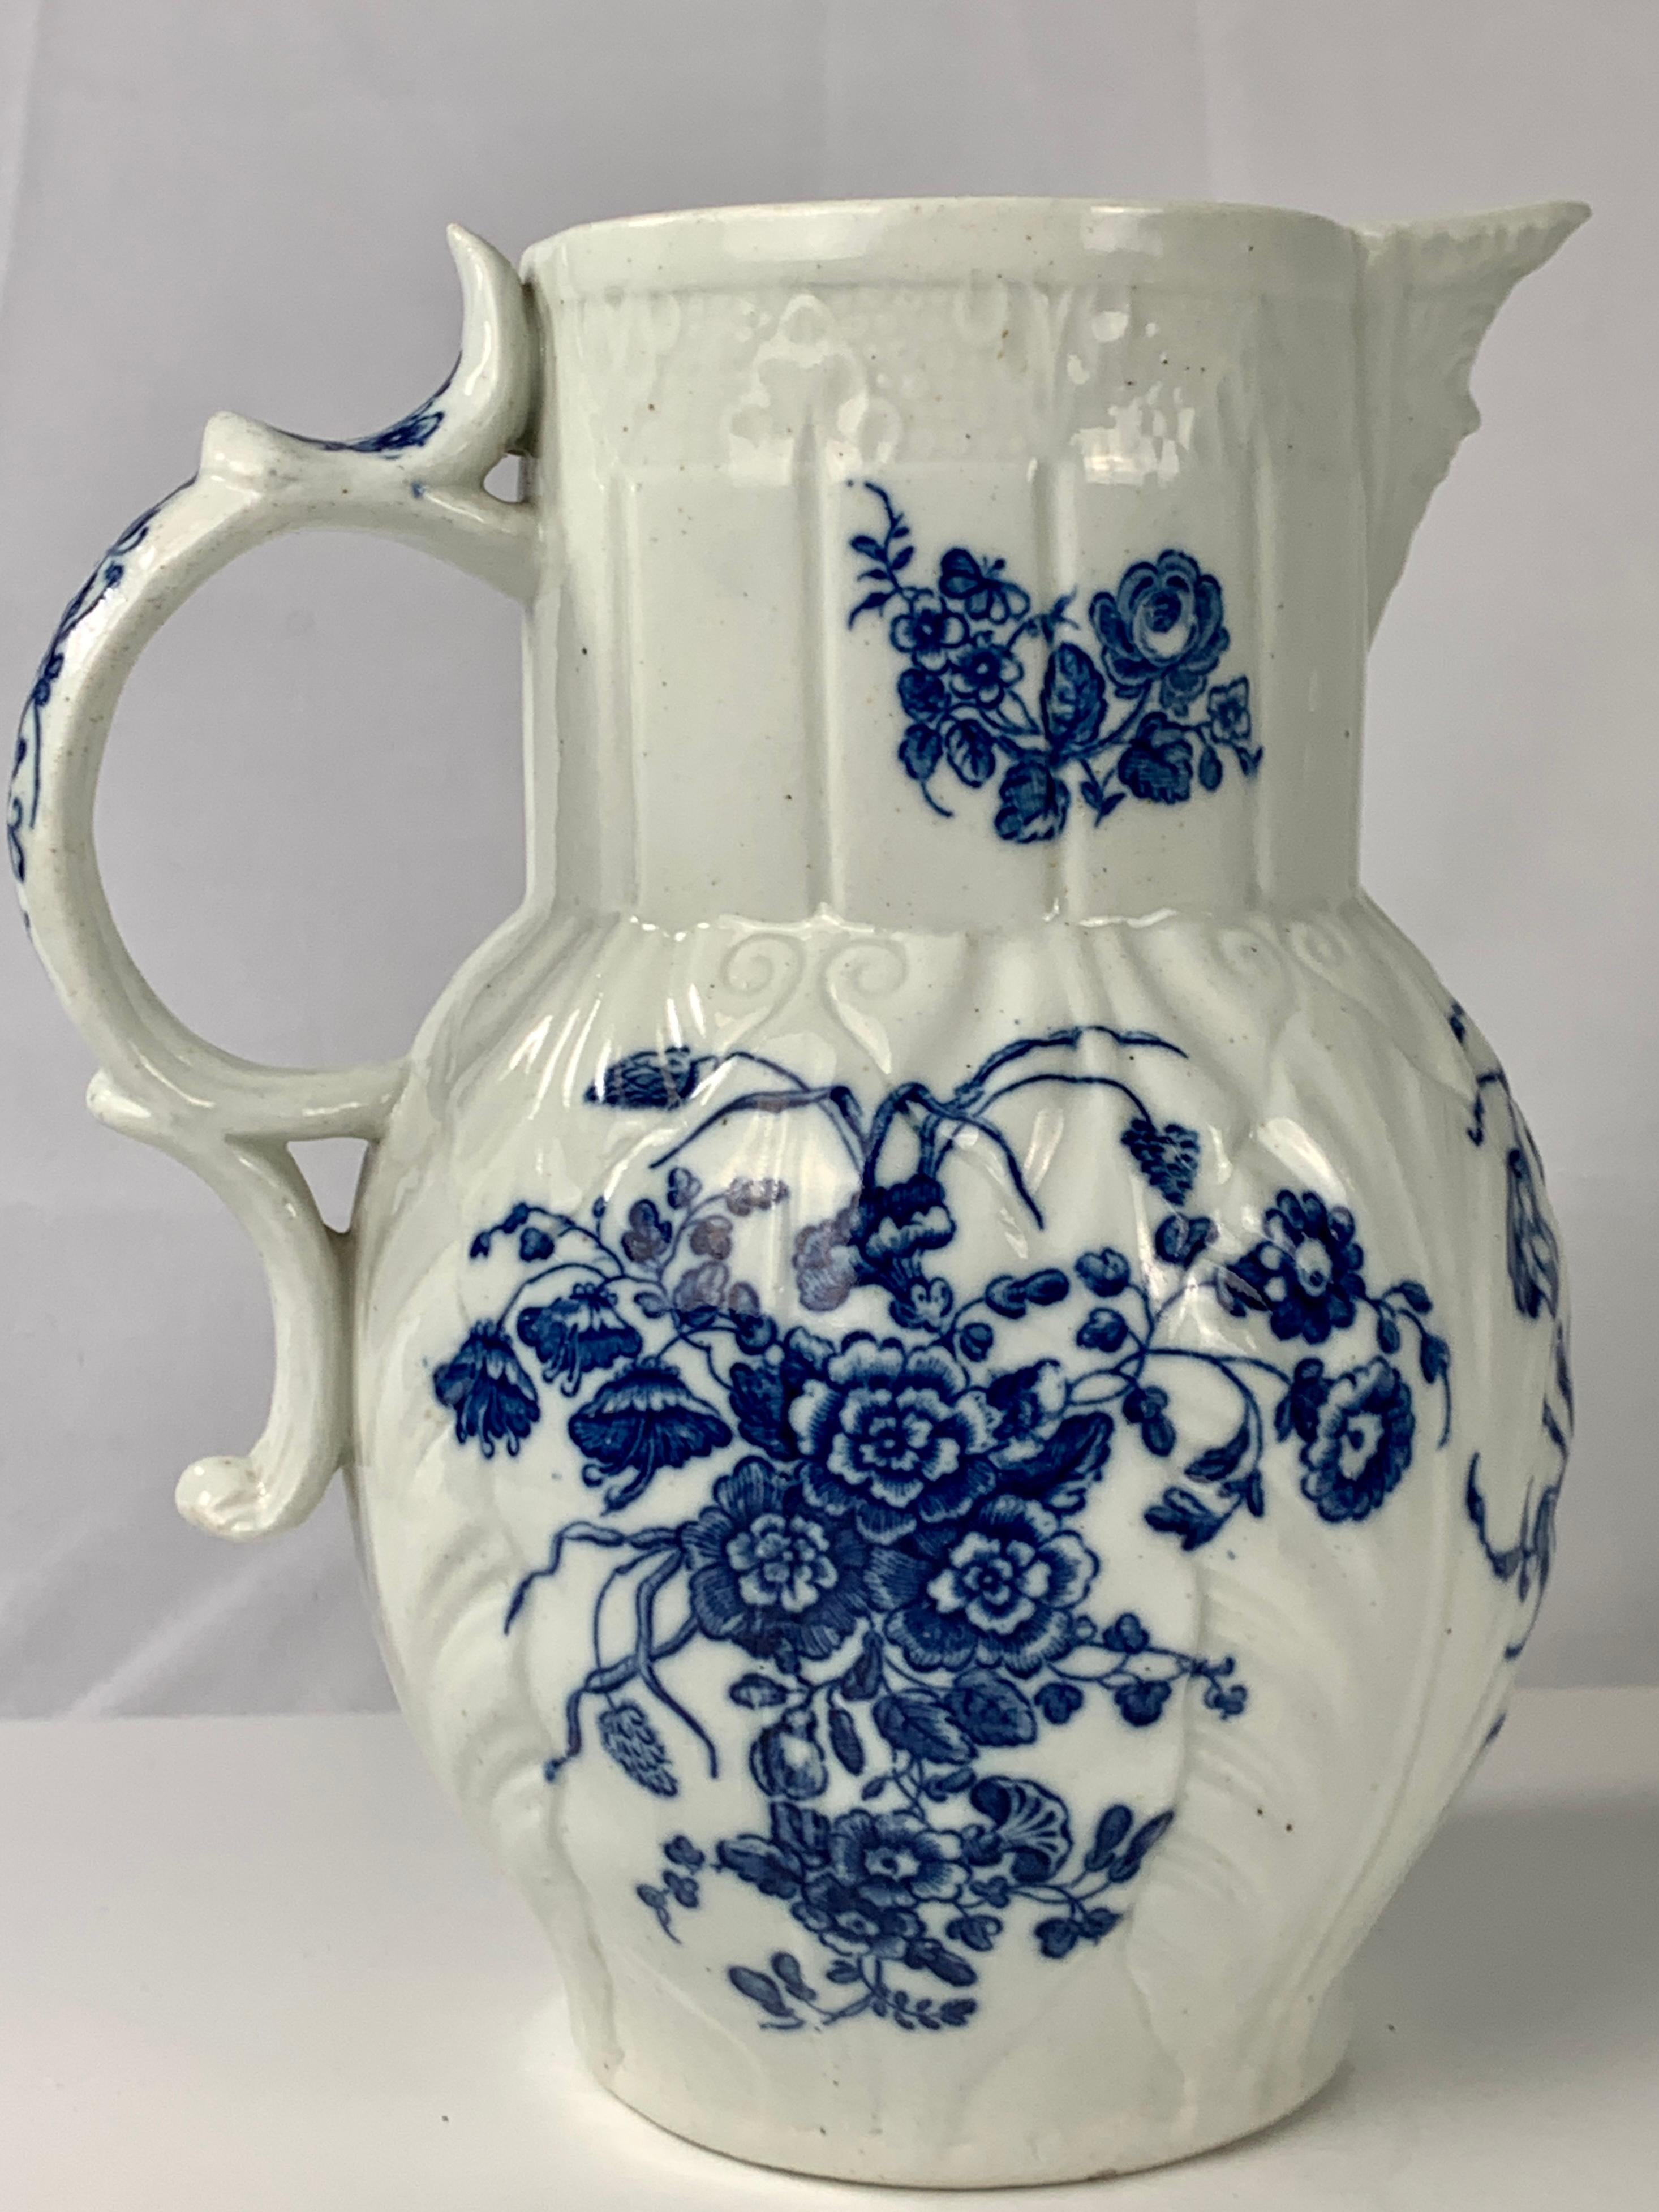 Caughley made this blue and white pitcher in England, in the mid 18th century, circa 1765.
Around the time that this pitcher was made English porcelain makers discovered the technique for printing on porcelain.
Caughley made several exquisite blue